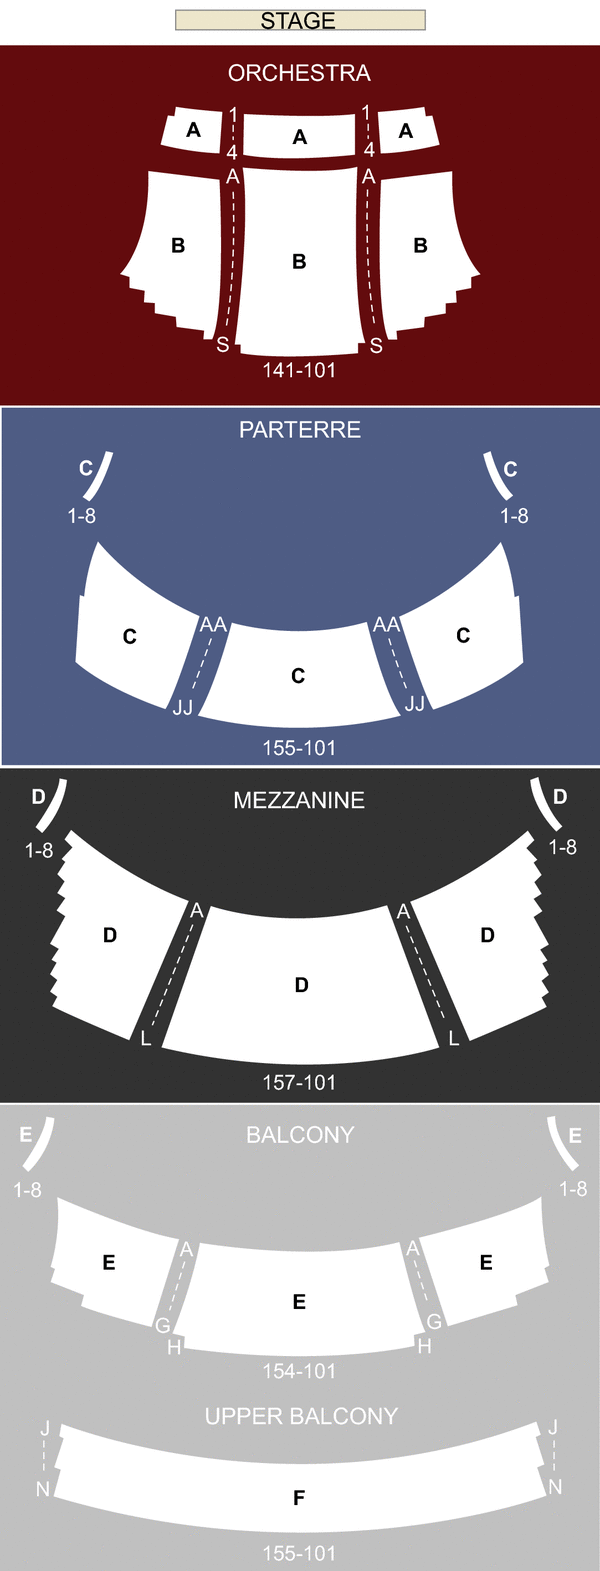 Dell Hall Seating Chart